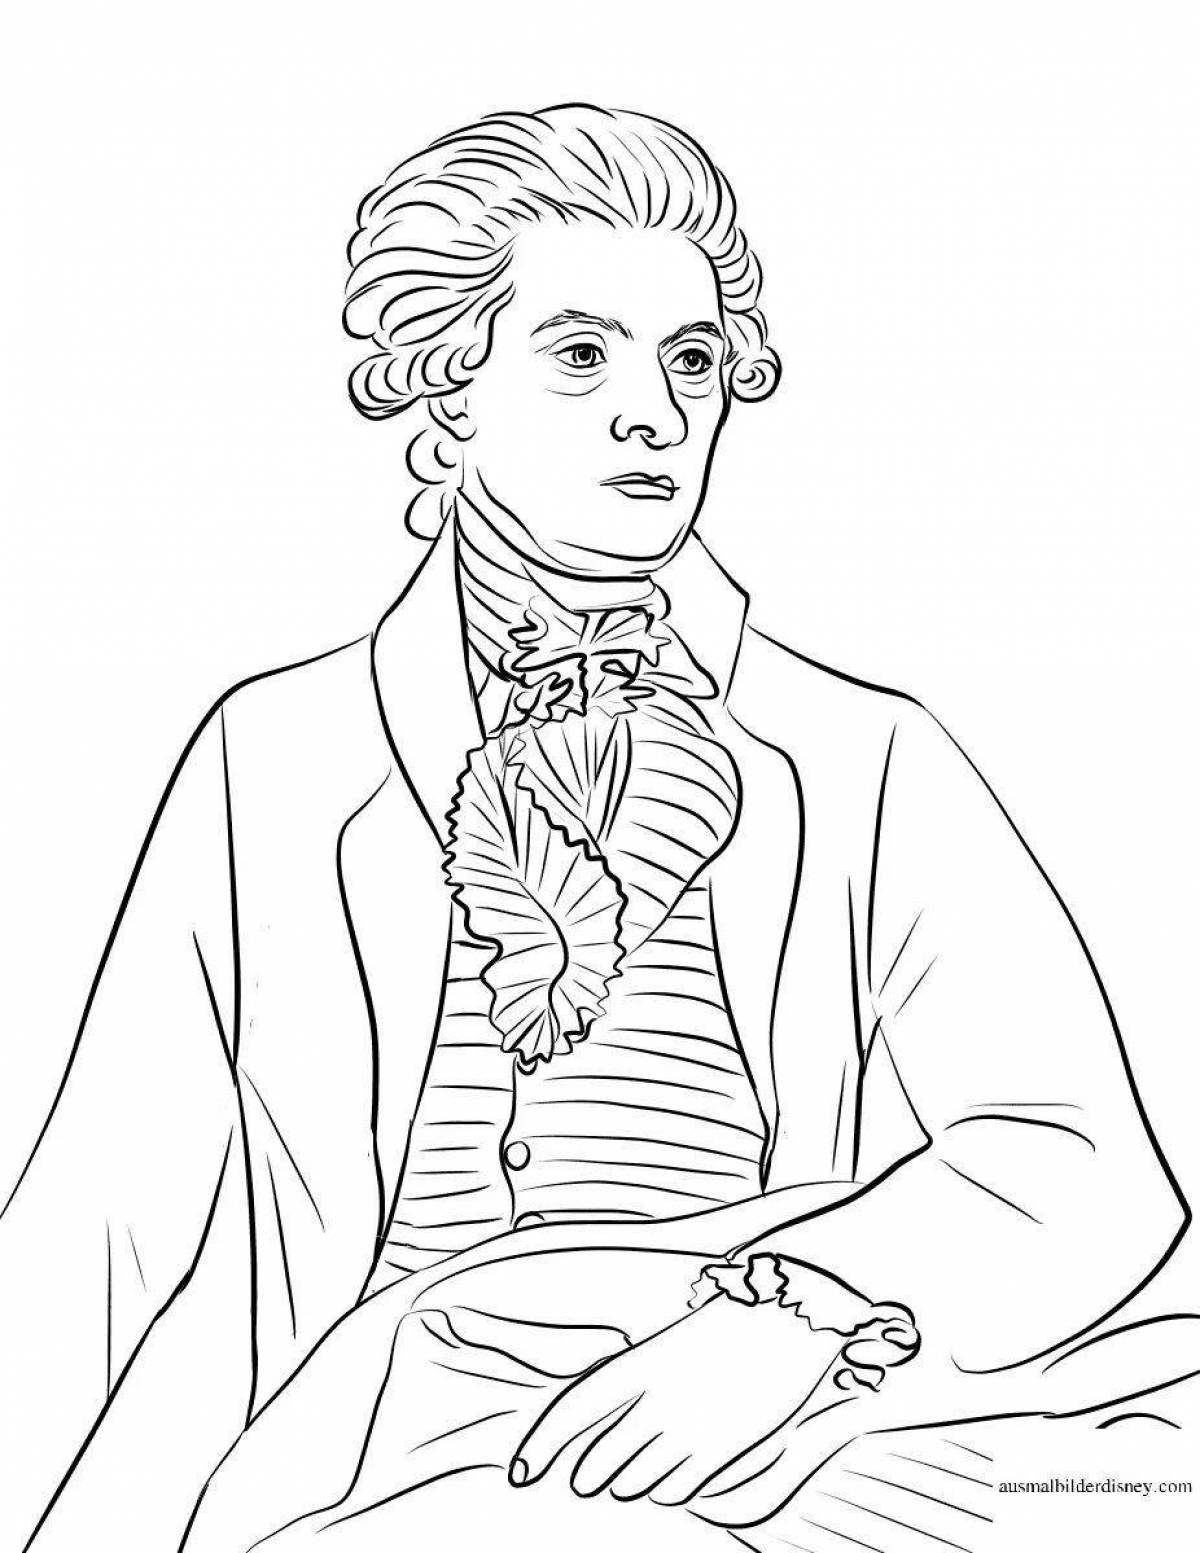 Colorful Suvorov coloring book for children